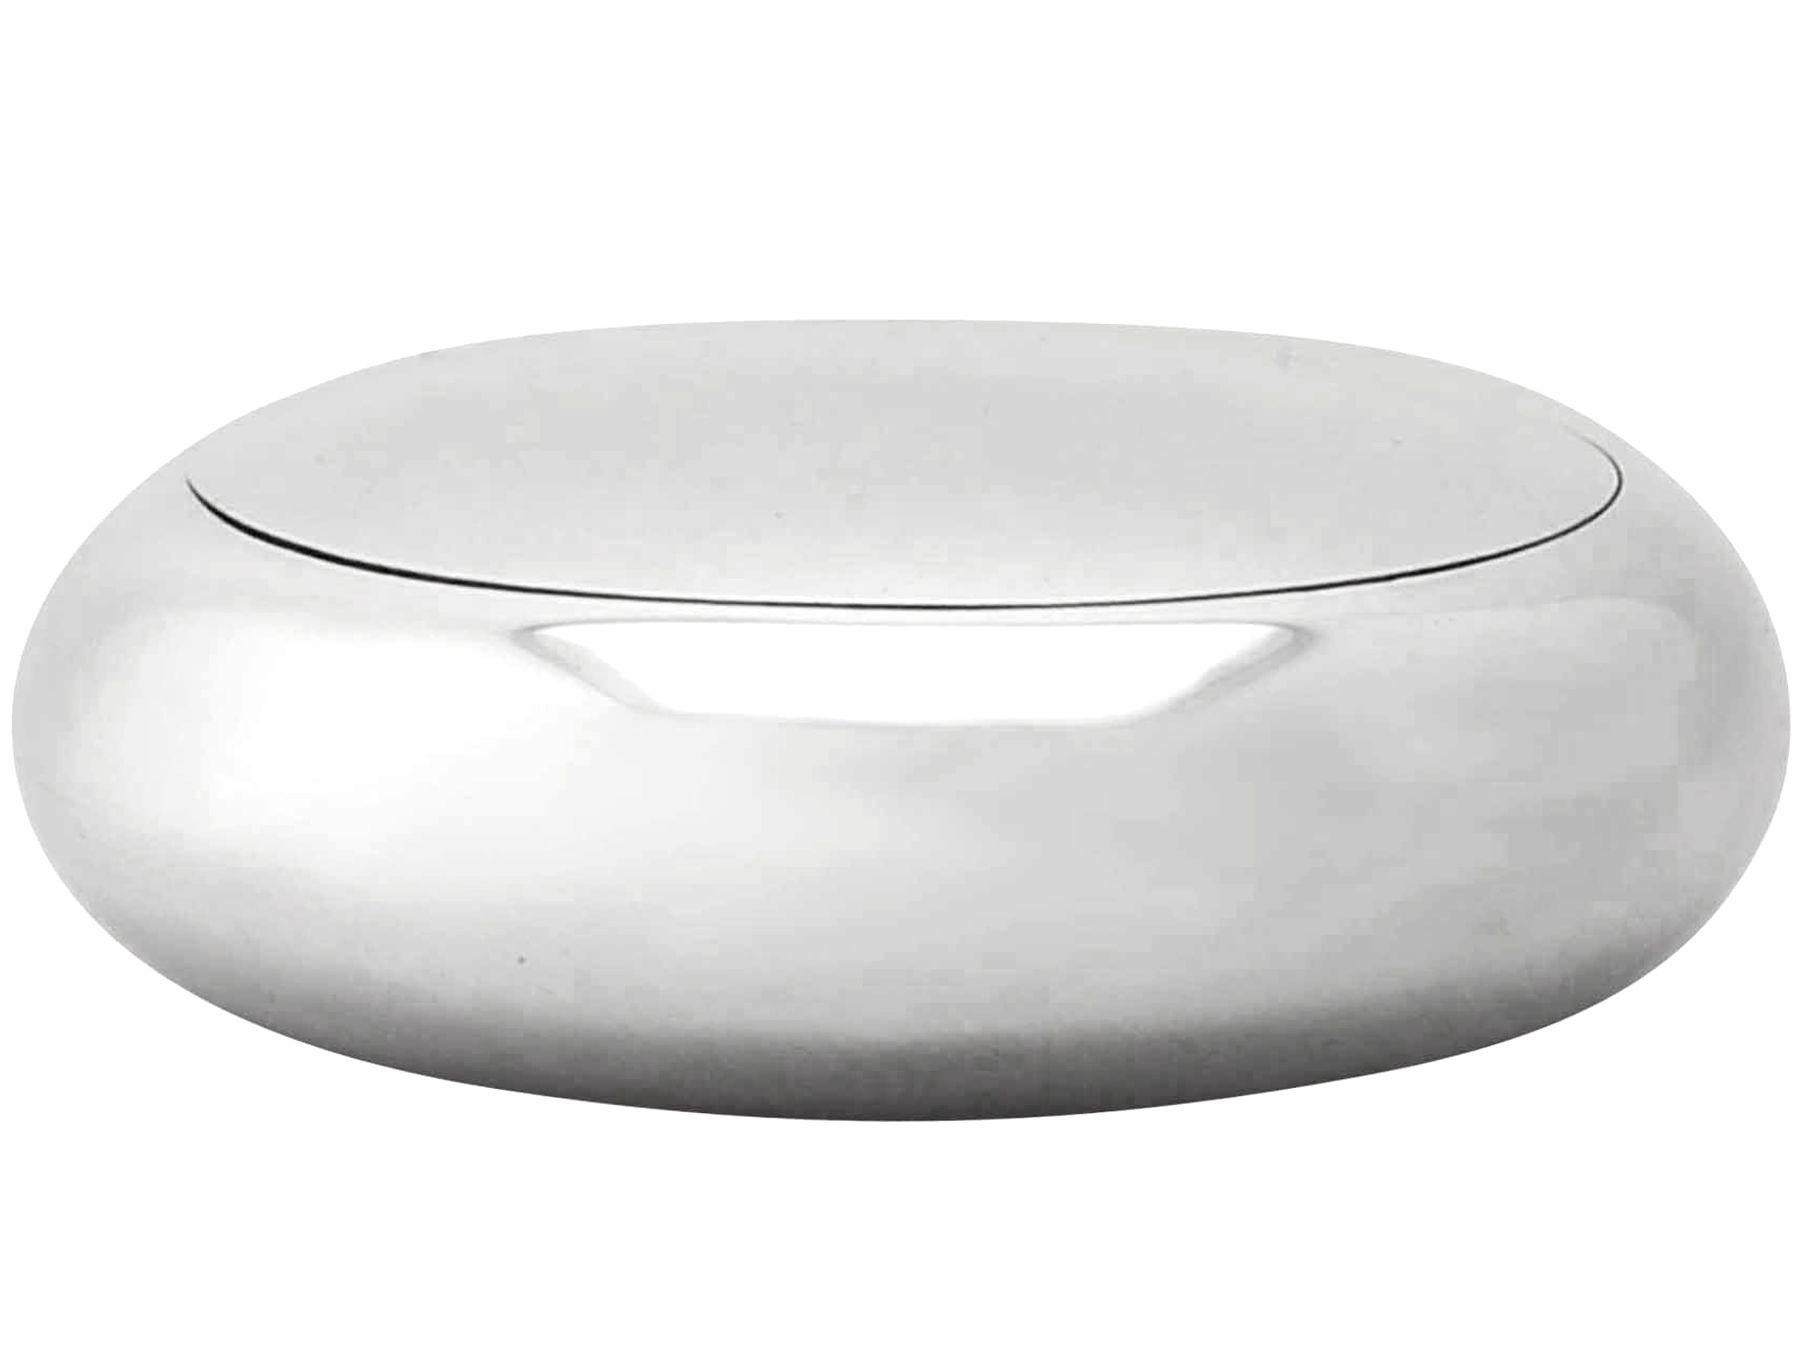 This exceptional antique Edwardian sterling silver tobacco box has a plain circular rounded form.

The underside of this box has a subtly concave form proffering a comfortable fit in the majority of pockets.

The surface of this antique silver